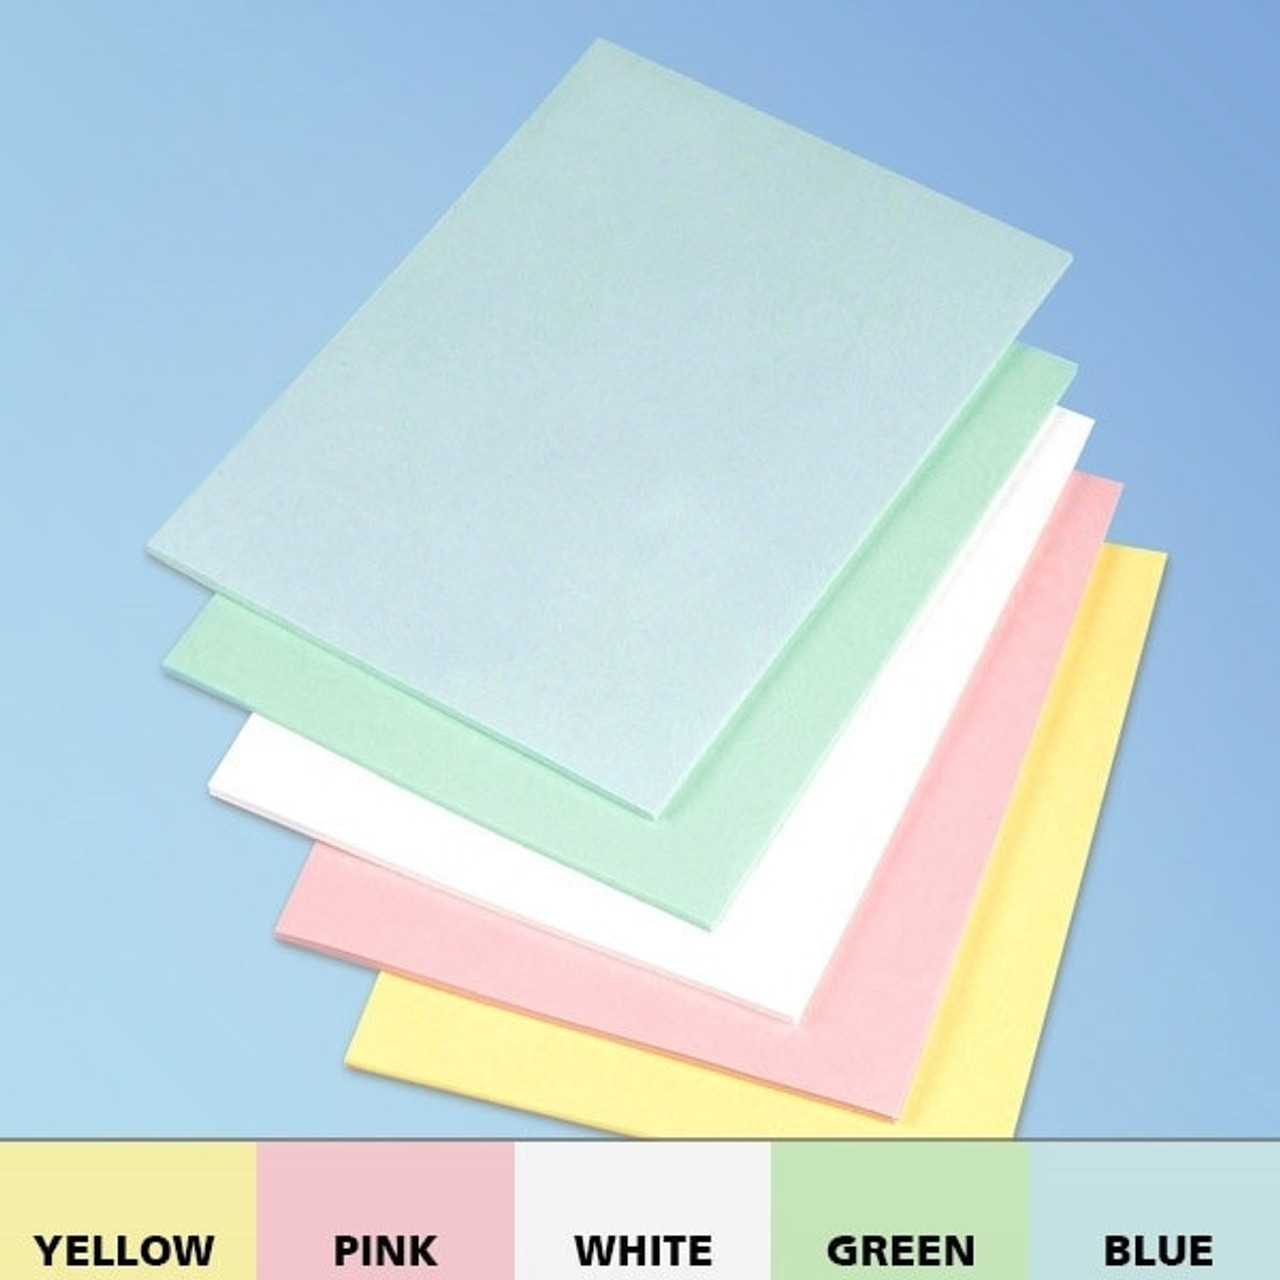 Autoclavable Cleanroom Paper